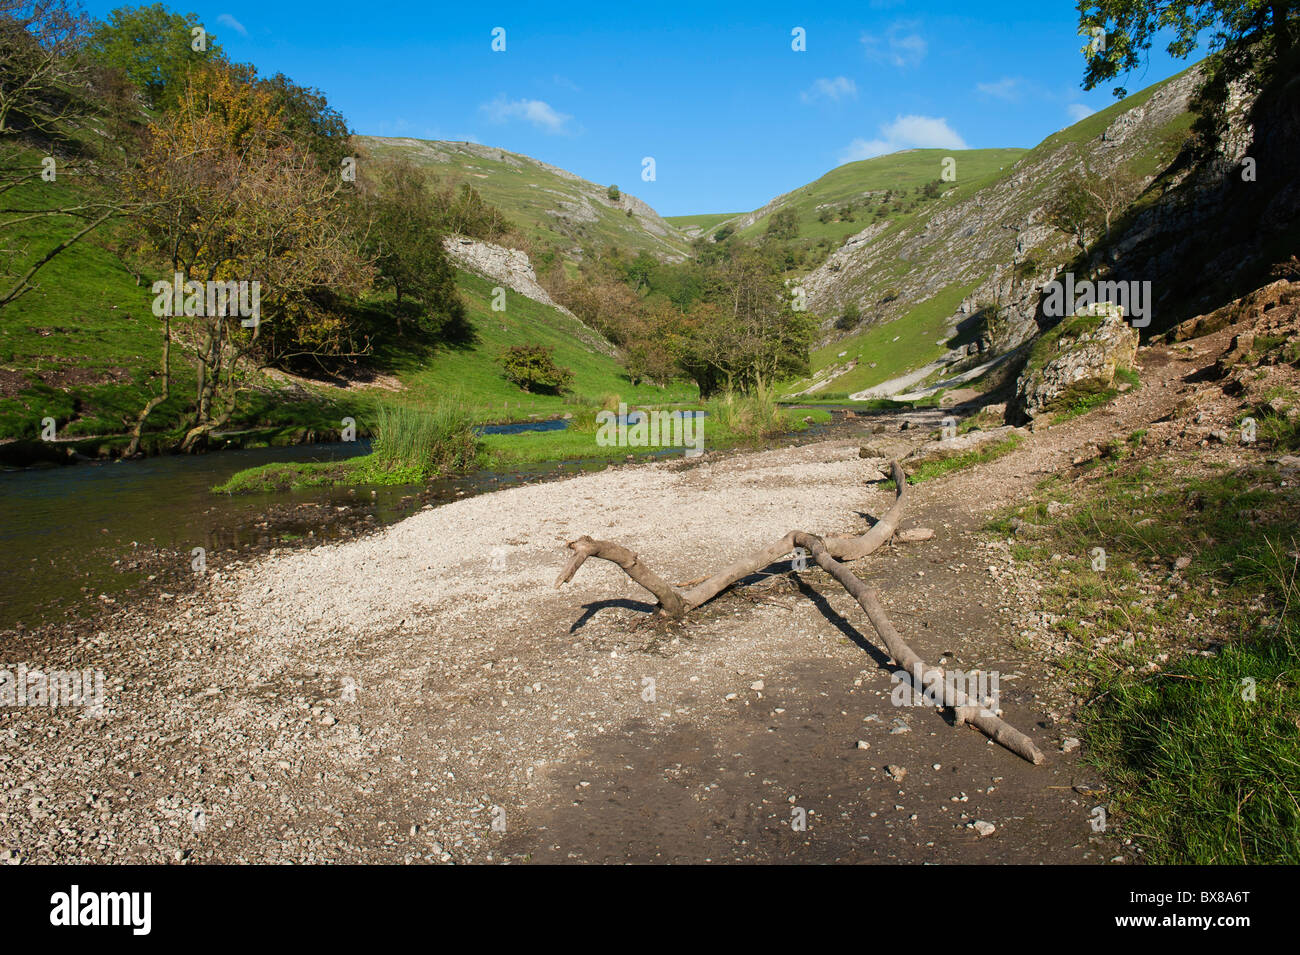 Dovedale in the Peak District, Derbyshire, England is a wonderful area for walking. The River Dove runs through this dale and it has some trout fish. Stock Photo